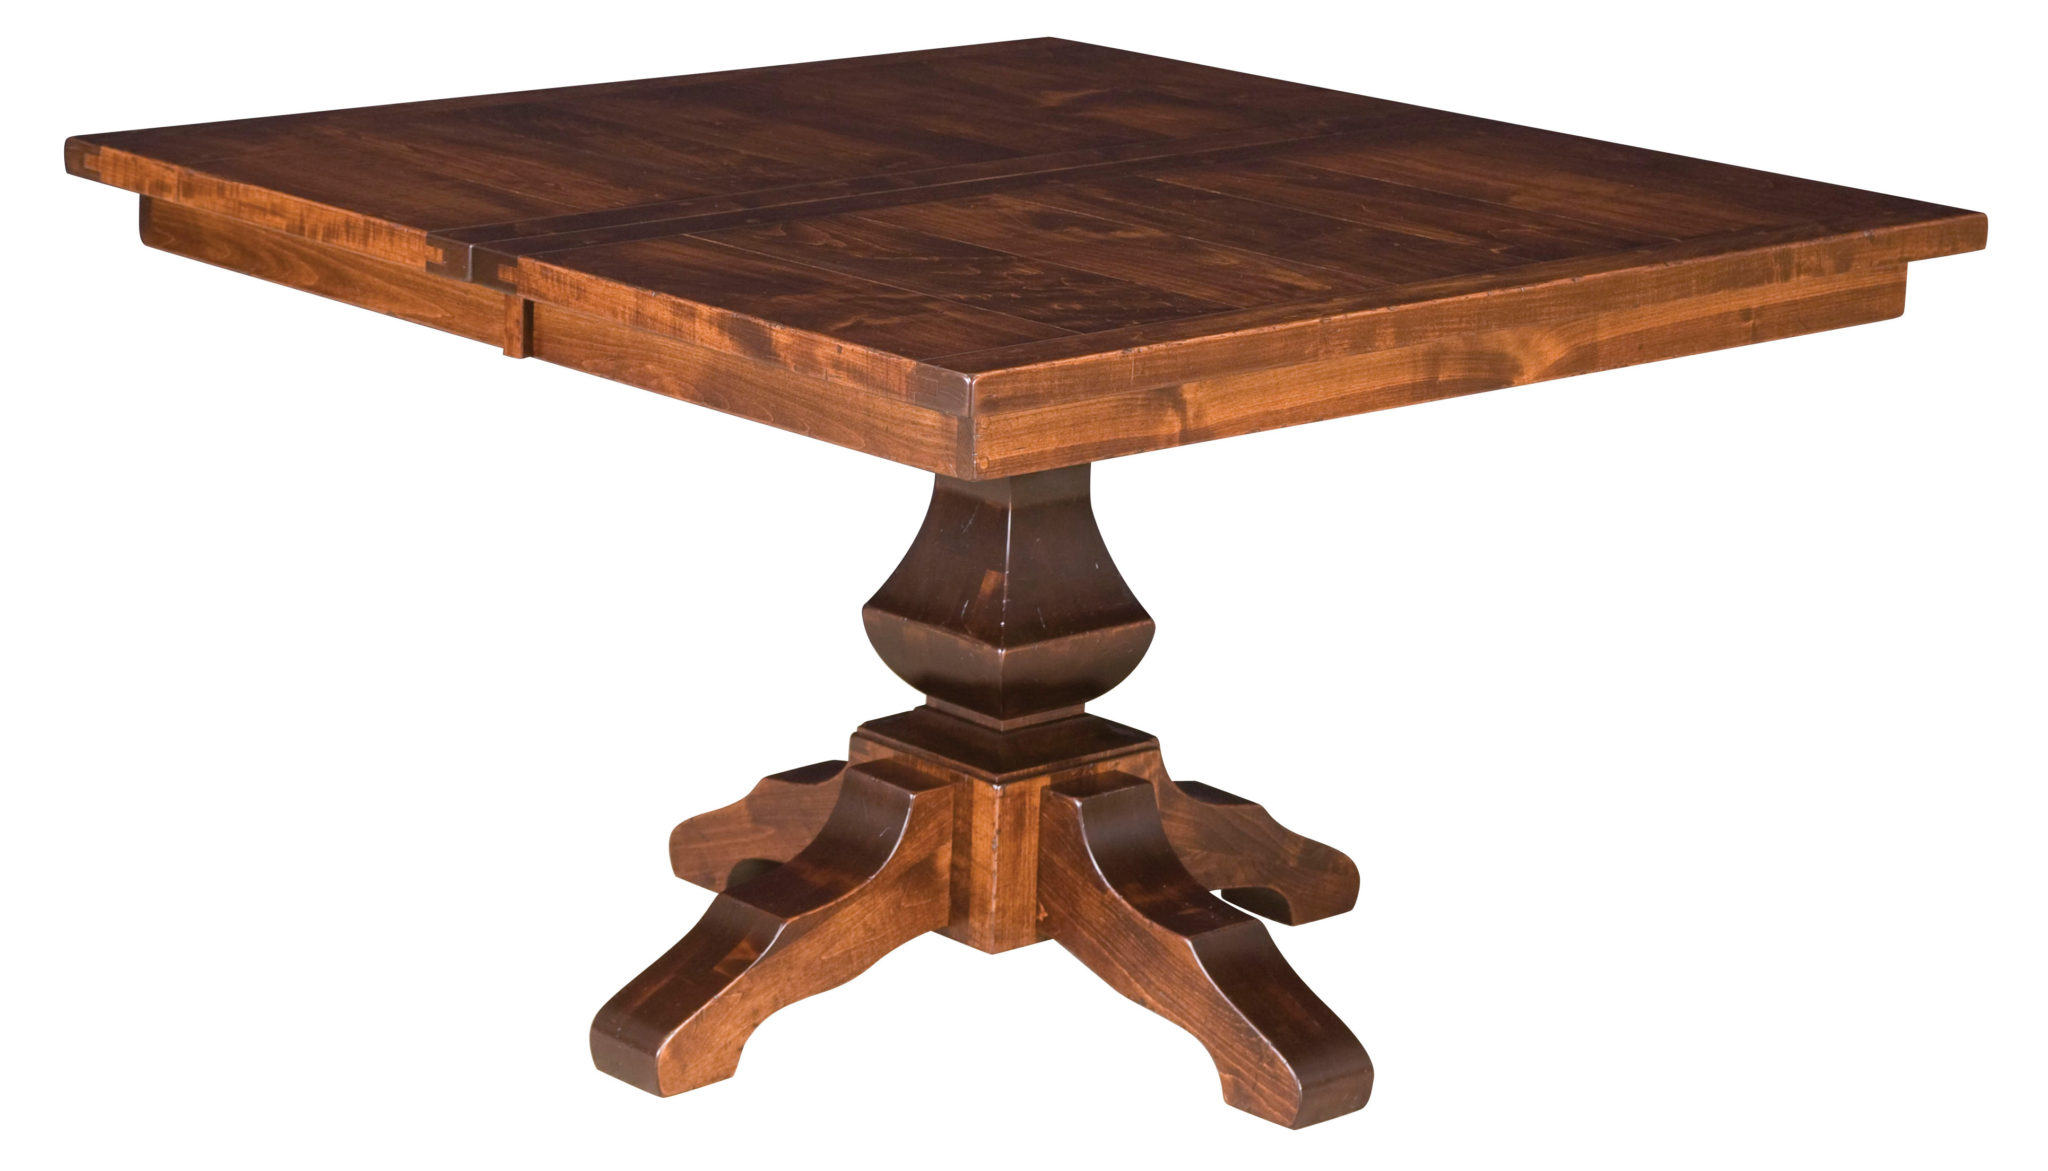 54 X 54 Dining Room Table